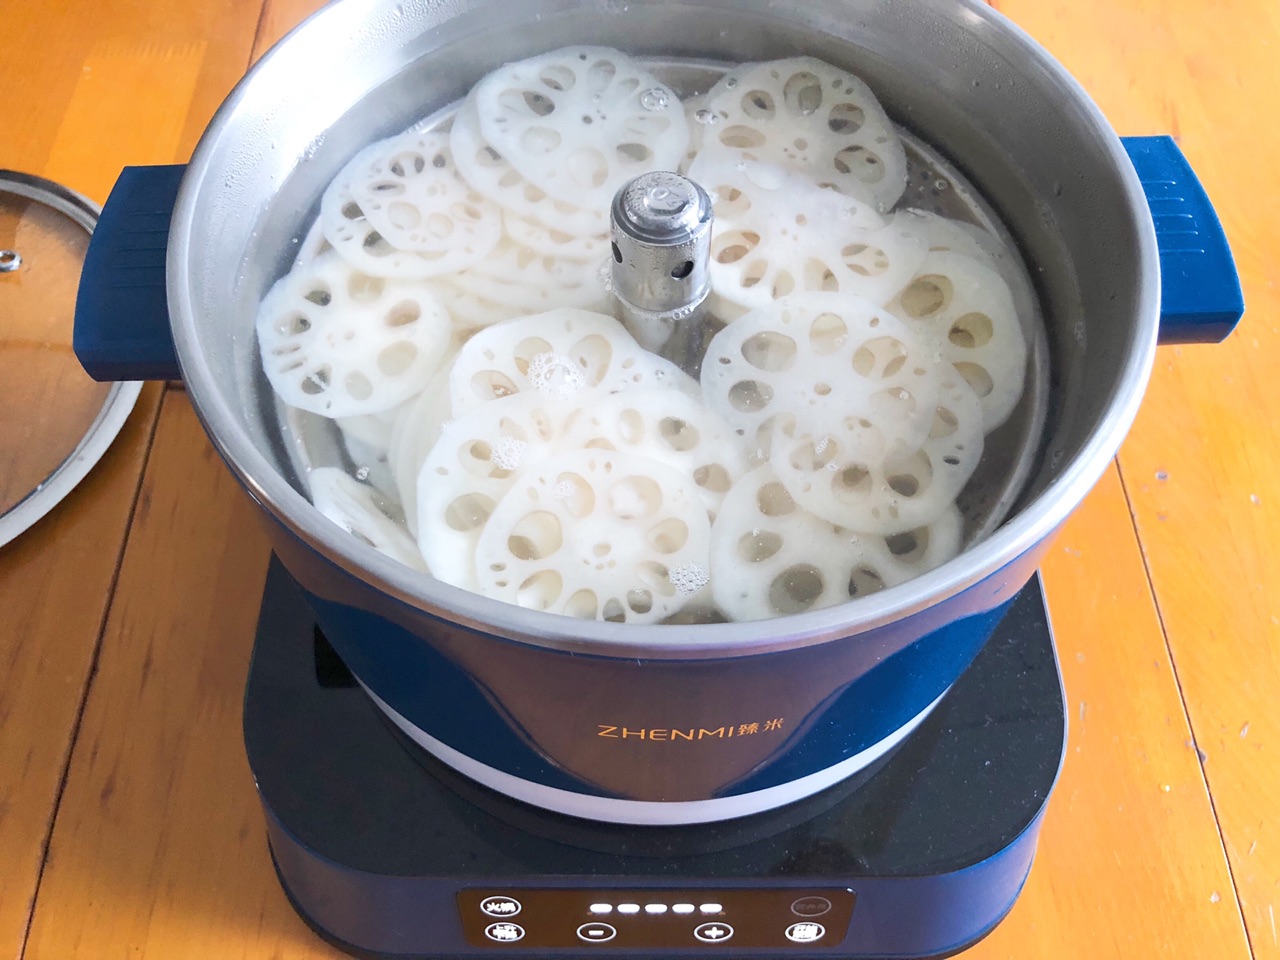 Put it into the lifting electric hot pot and boil it with water for 2 minutes